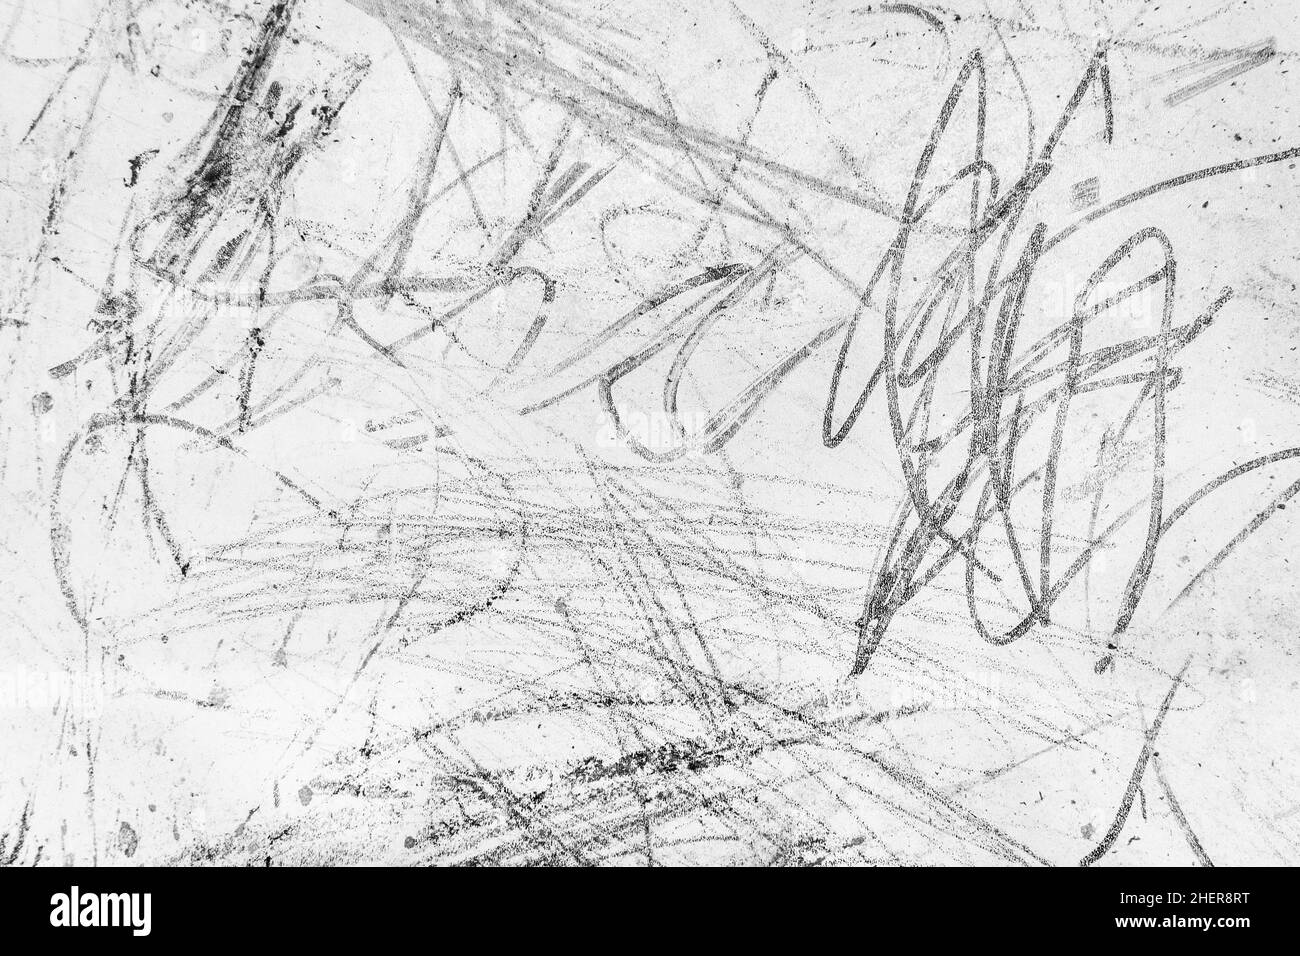 Abstract chaotic children's pattern pattern black crayon on white board dirty background. Stock Photo